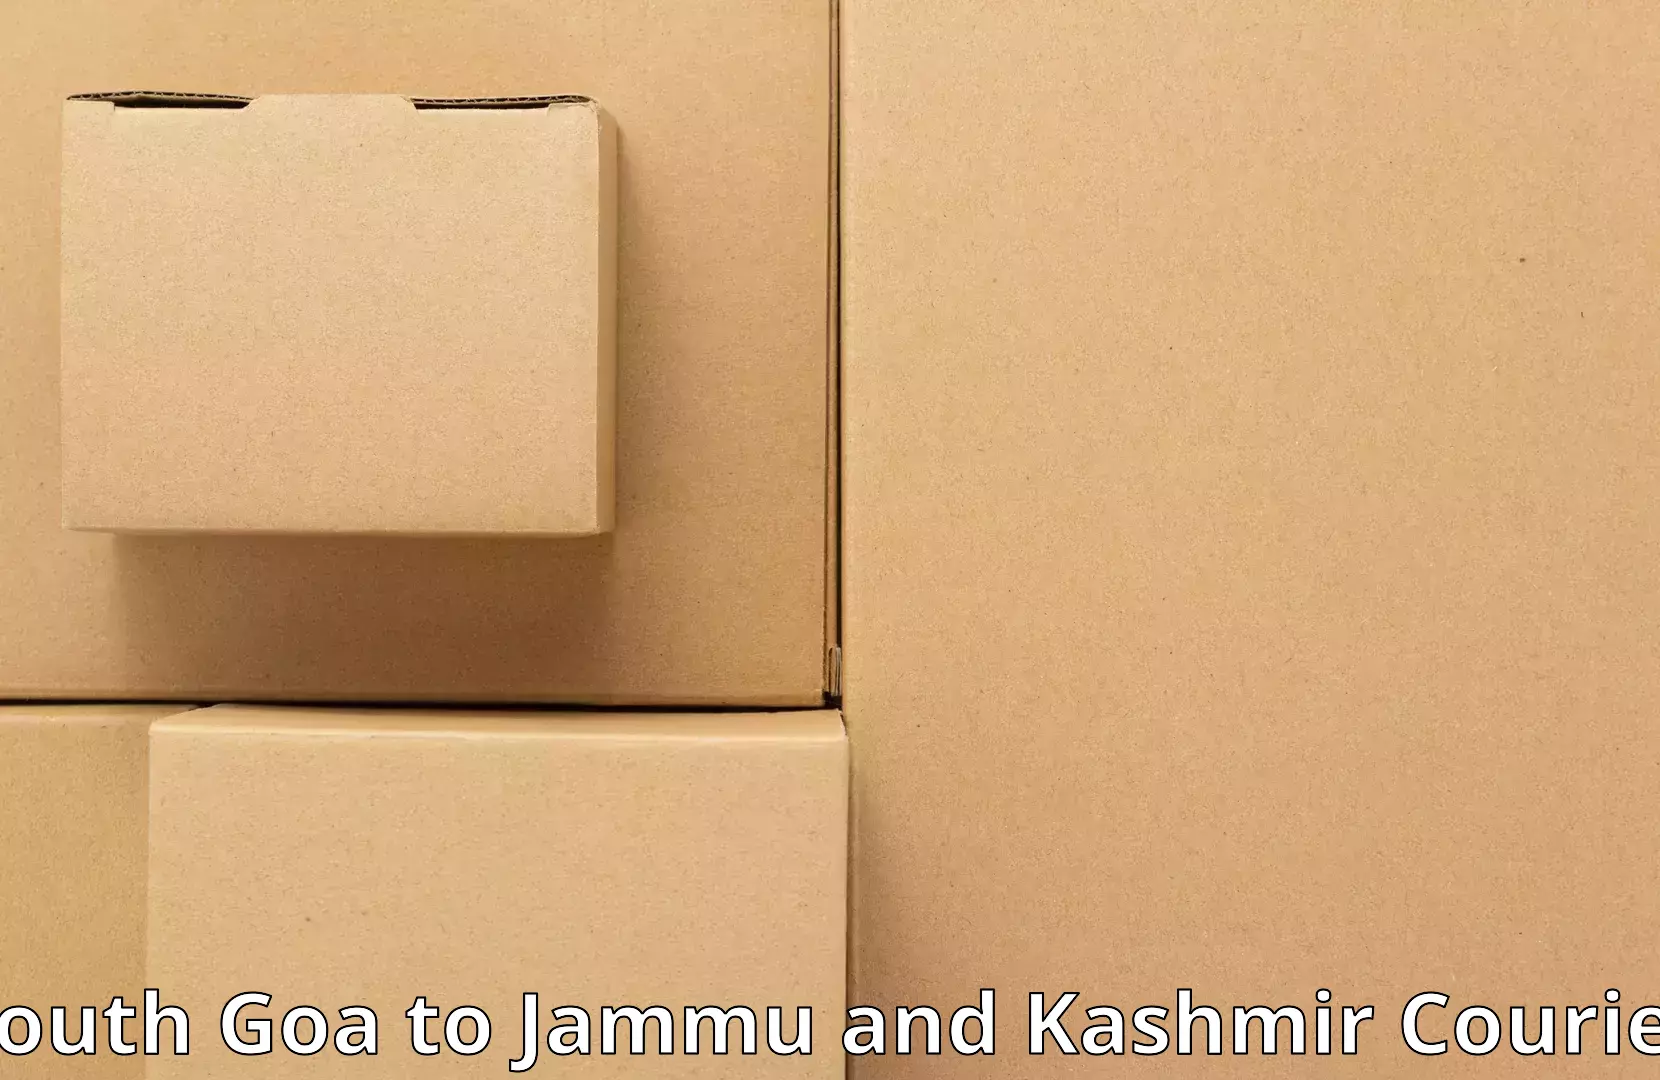 Expert moving and storage South Goa to University of Jammu